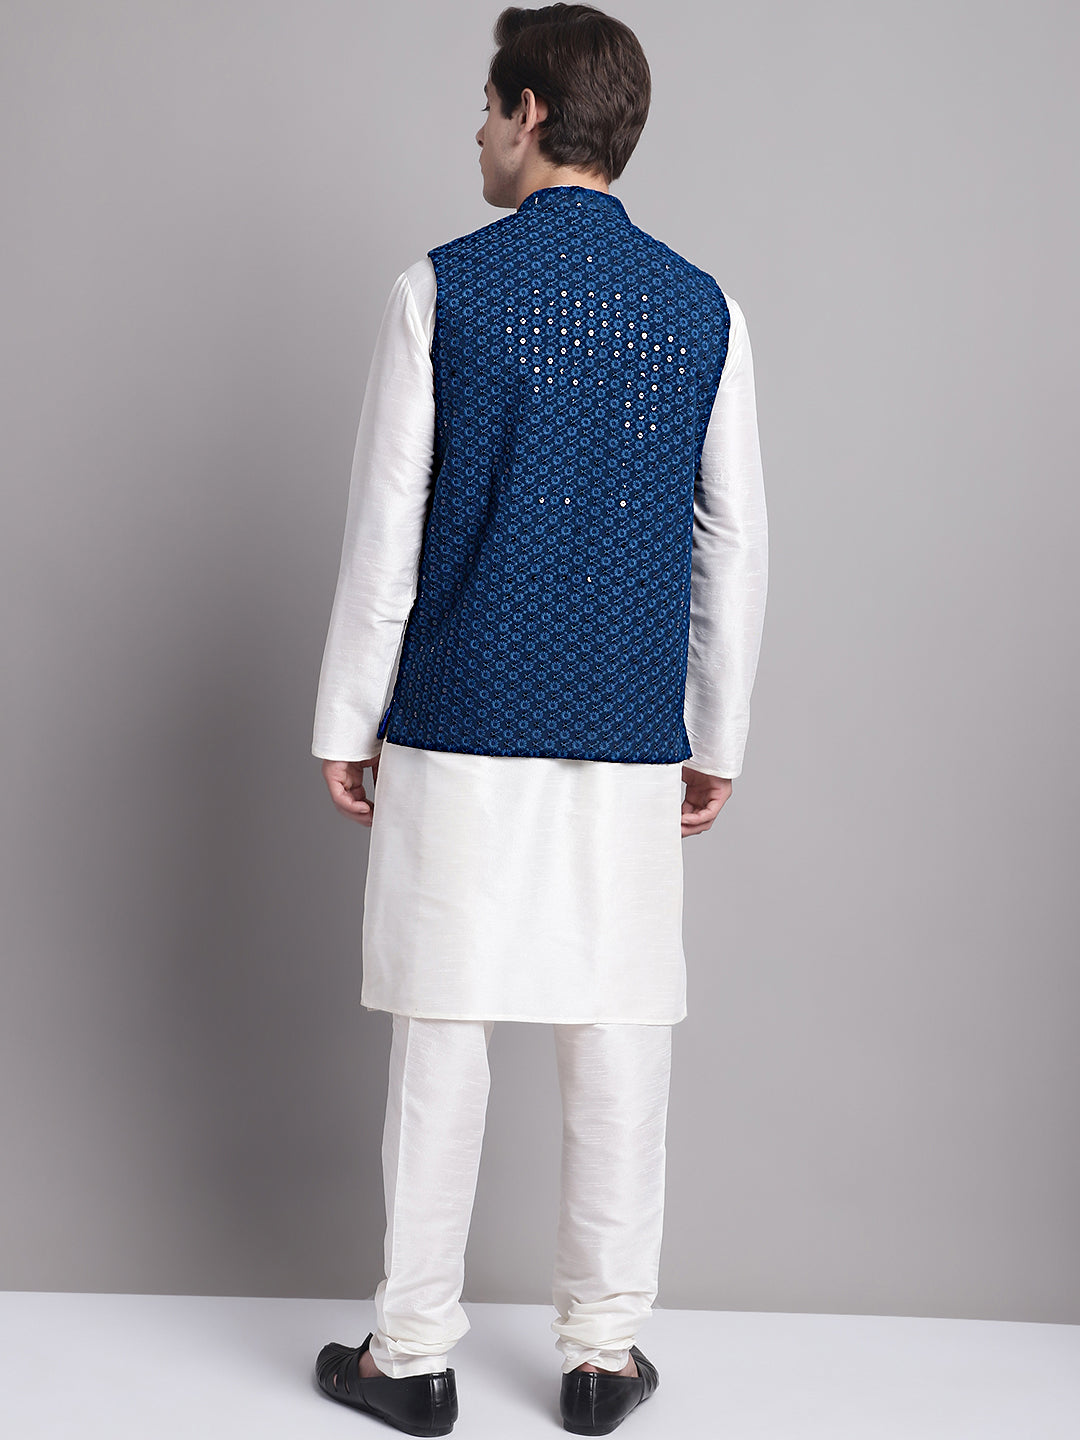 Men's Peacock Blue Sequins and Embroidred Nehru Jacket With Solid Kurta Pyjama.